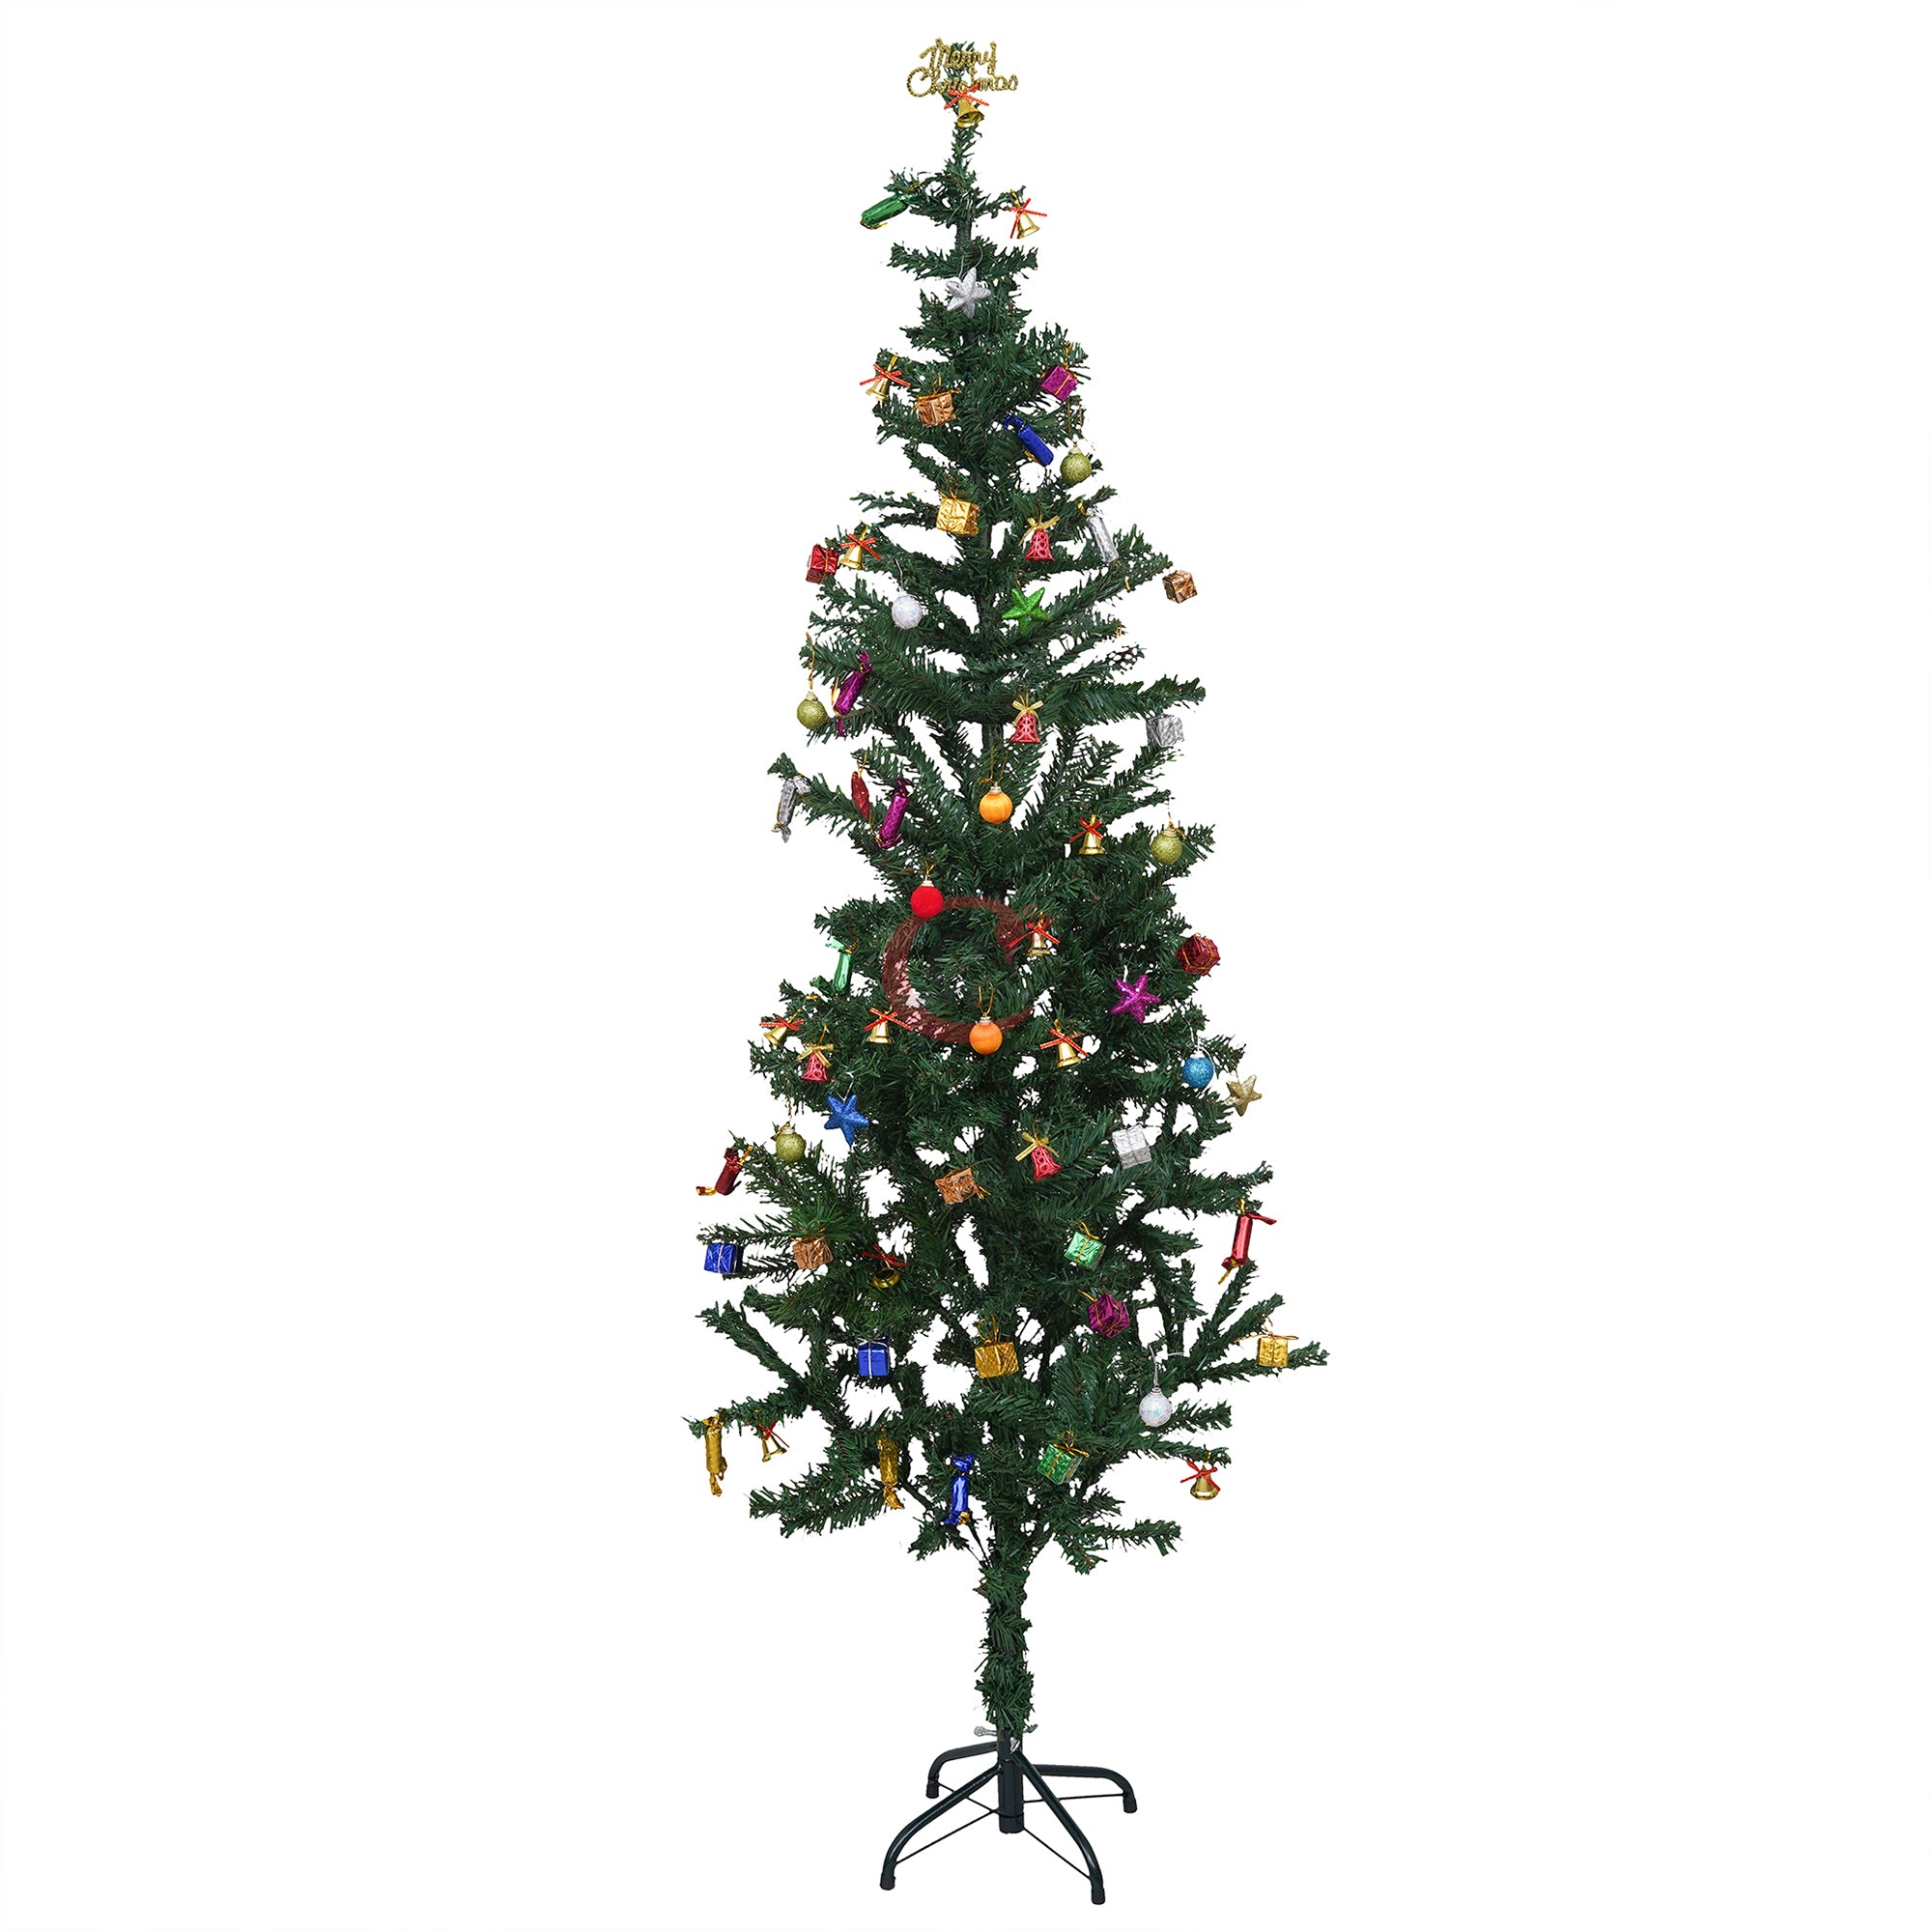 eCraftIndia 6 Feet Green Artificial Christmas Tree Xmas Pine Tree with Stand and 100 Christmas Decoration Ornaments Props - Merry Christmas Decoration Item for Home, Office, and Church 2